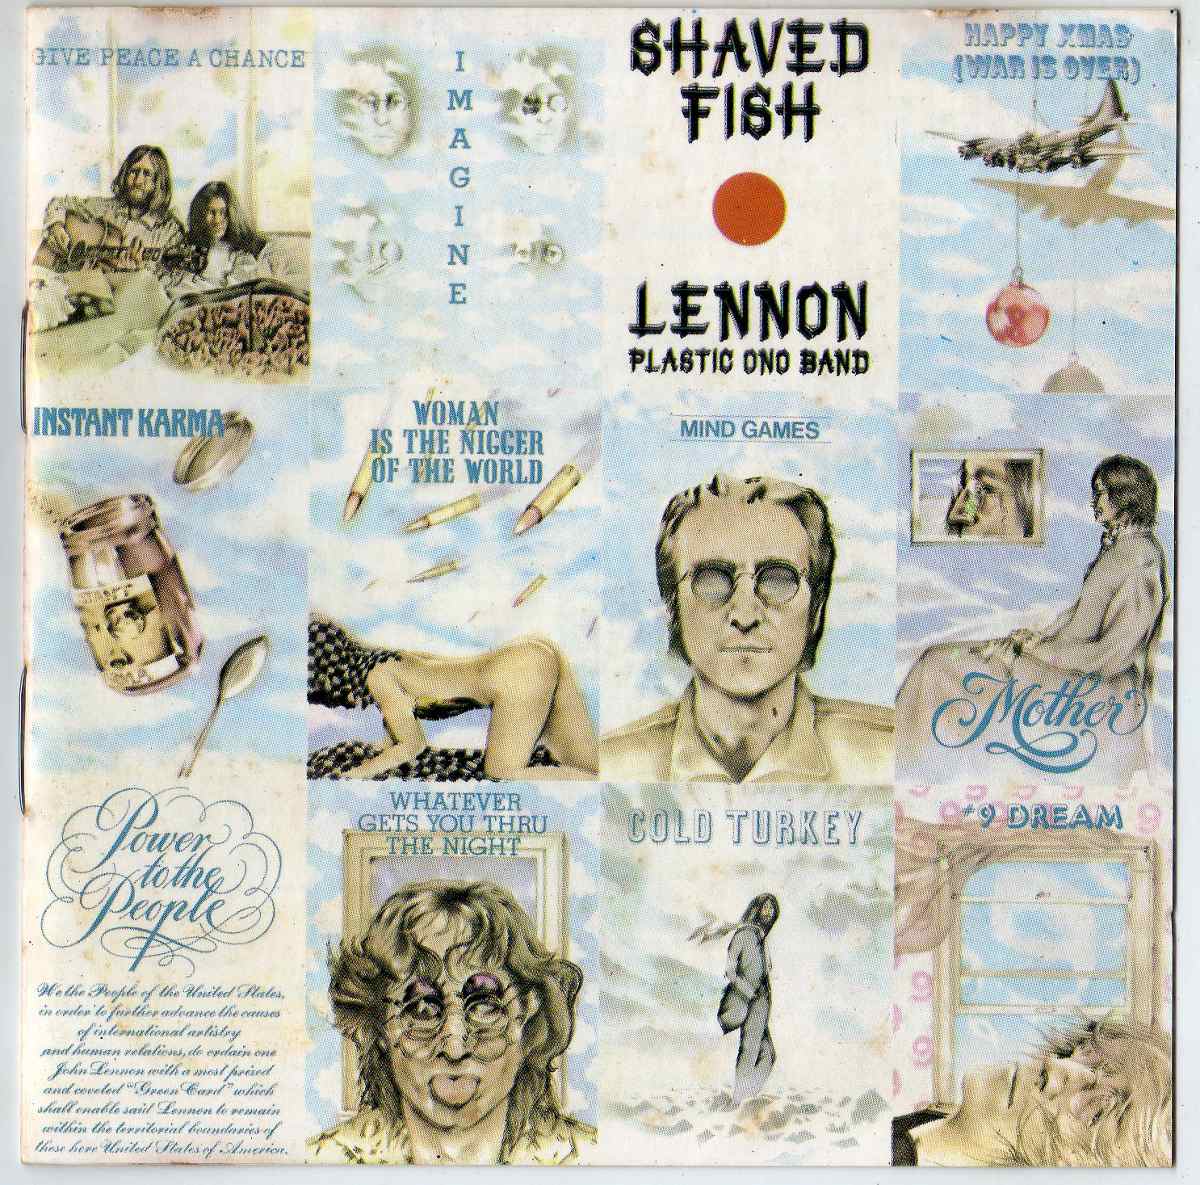 best of Lennon ono band fish Shaved plastic